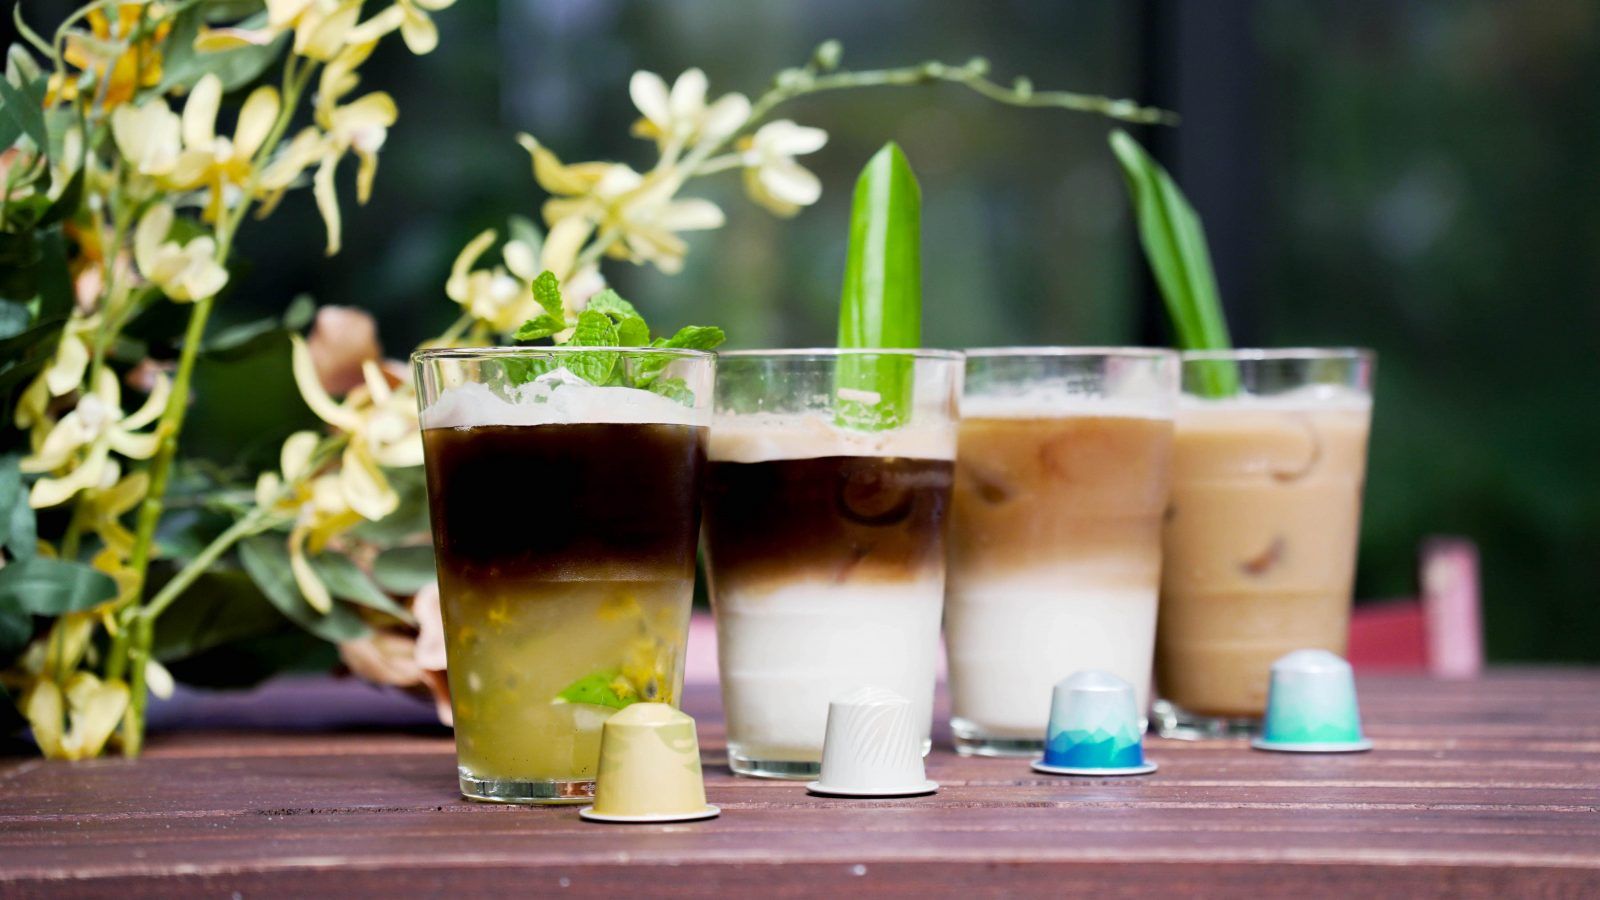 Iced Coffee Pods Assortment, Barista Creations